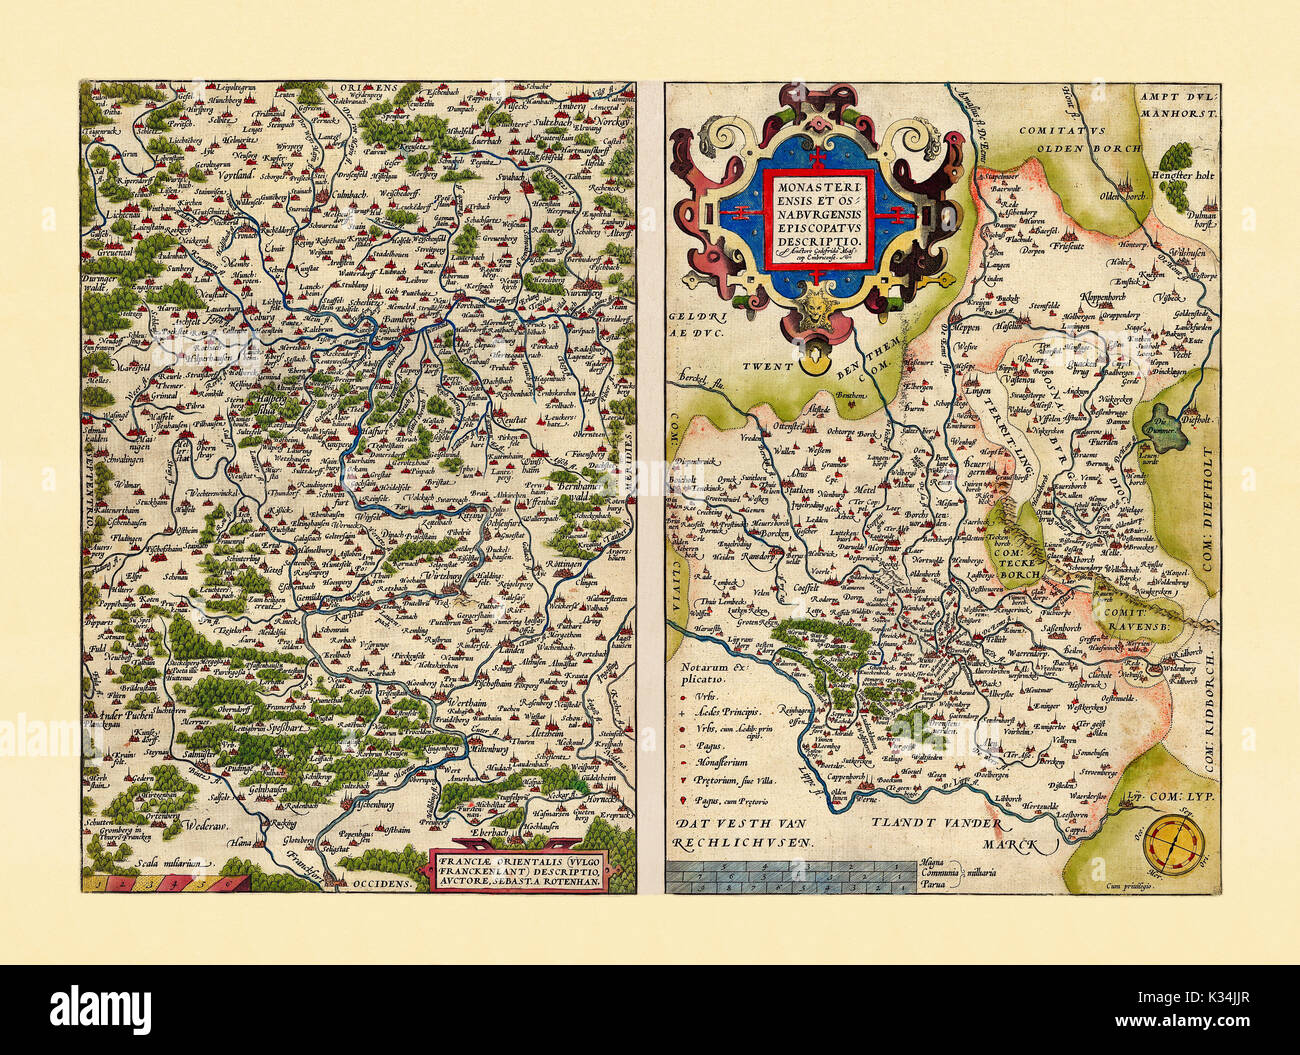 Old maps of Westphalia and Bavaria. Excellent state of preservation realized in ancient style. Side by side graphic composition. By Ortelius, Theatrum Orbis Terrarum, Antwerp, 1570 Stock Photo